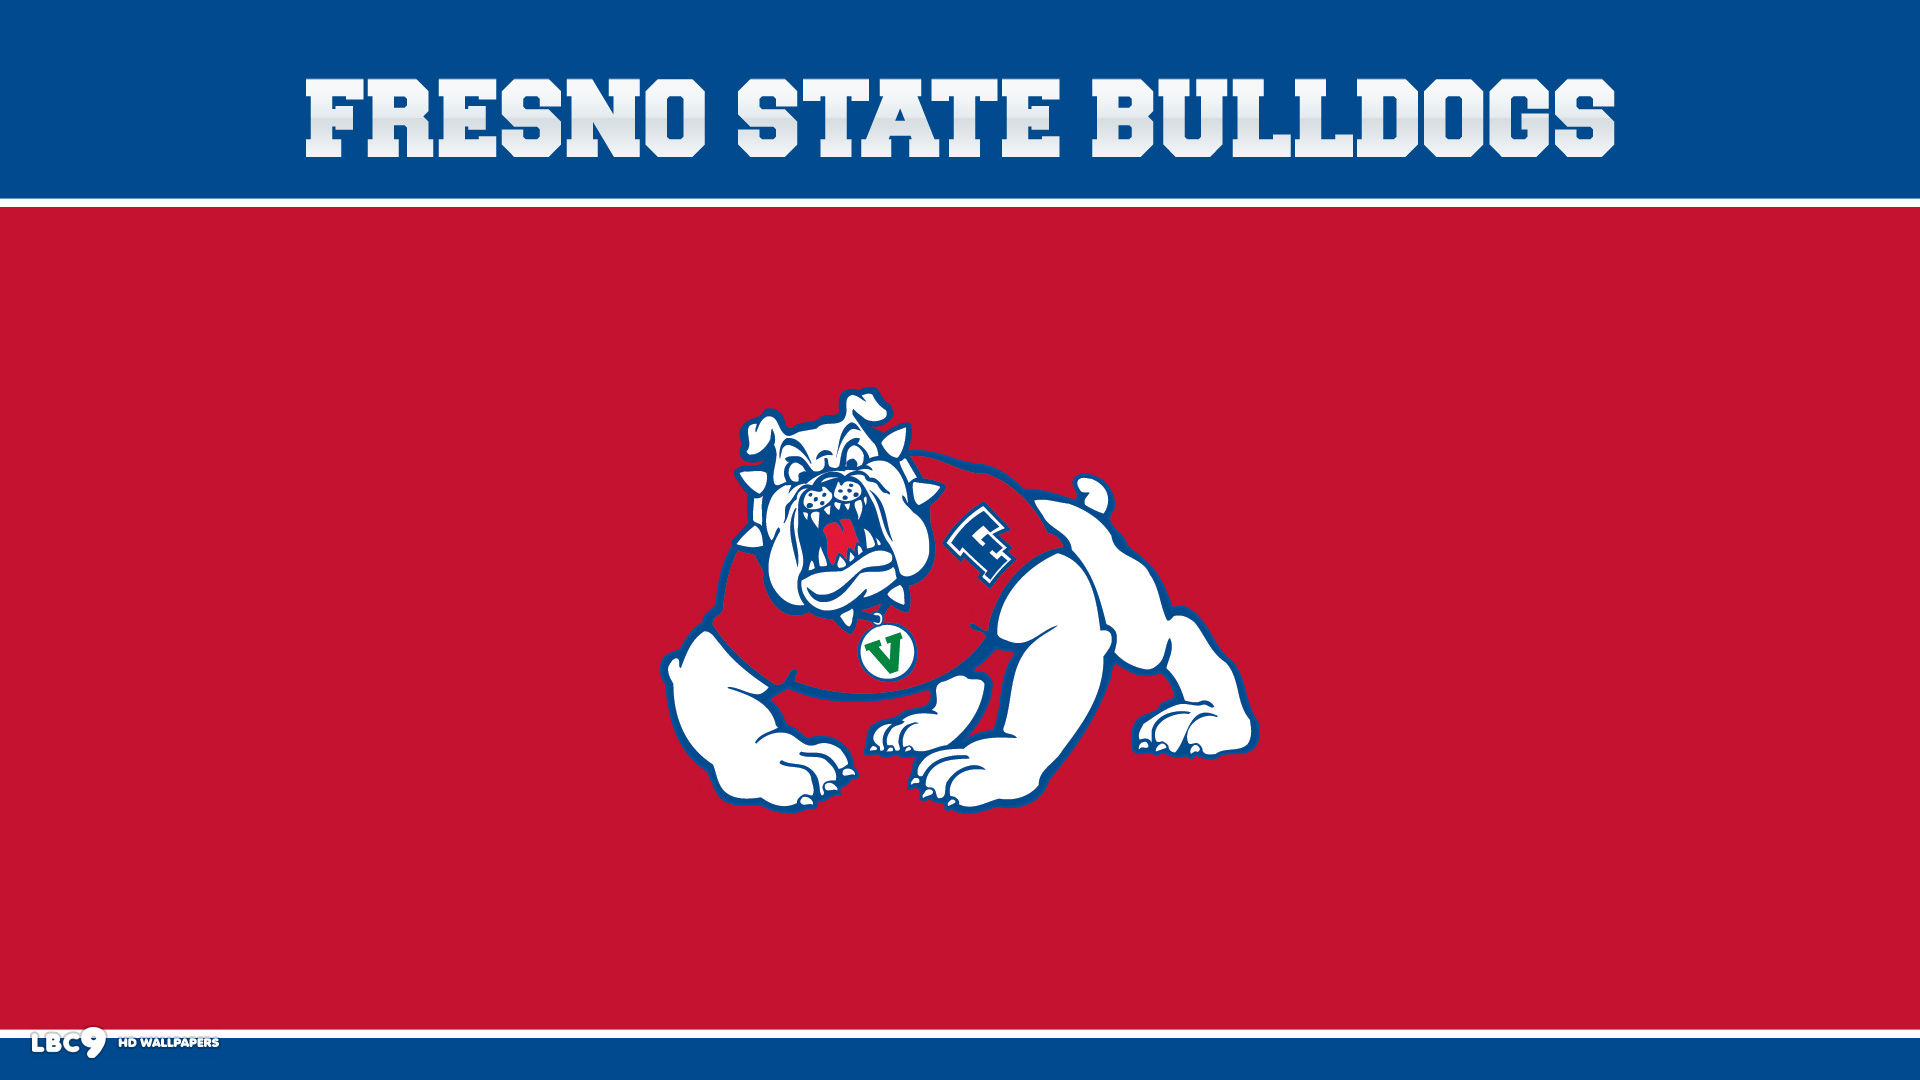 Fresno state bulldogs wallpaper 2 / 2 college athletics hd backgrounds